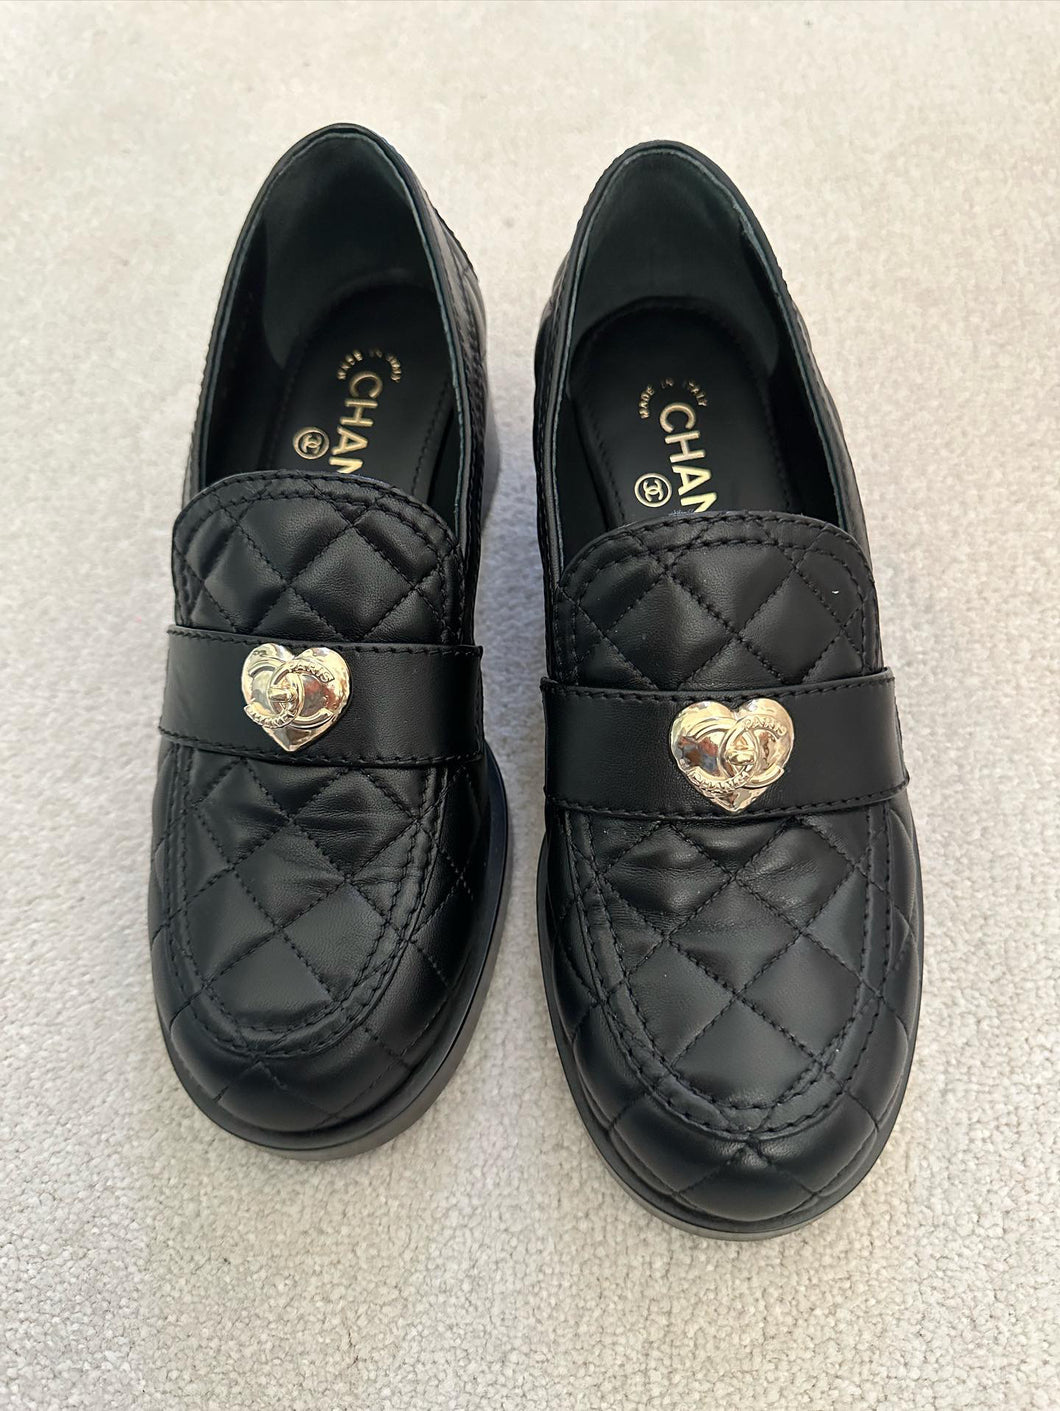 Chanel 23P Heart Black Leather GHW Loafers with Heels size EU 38.5